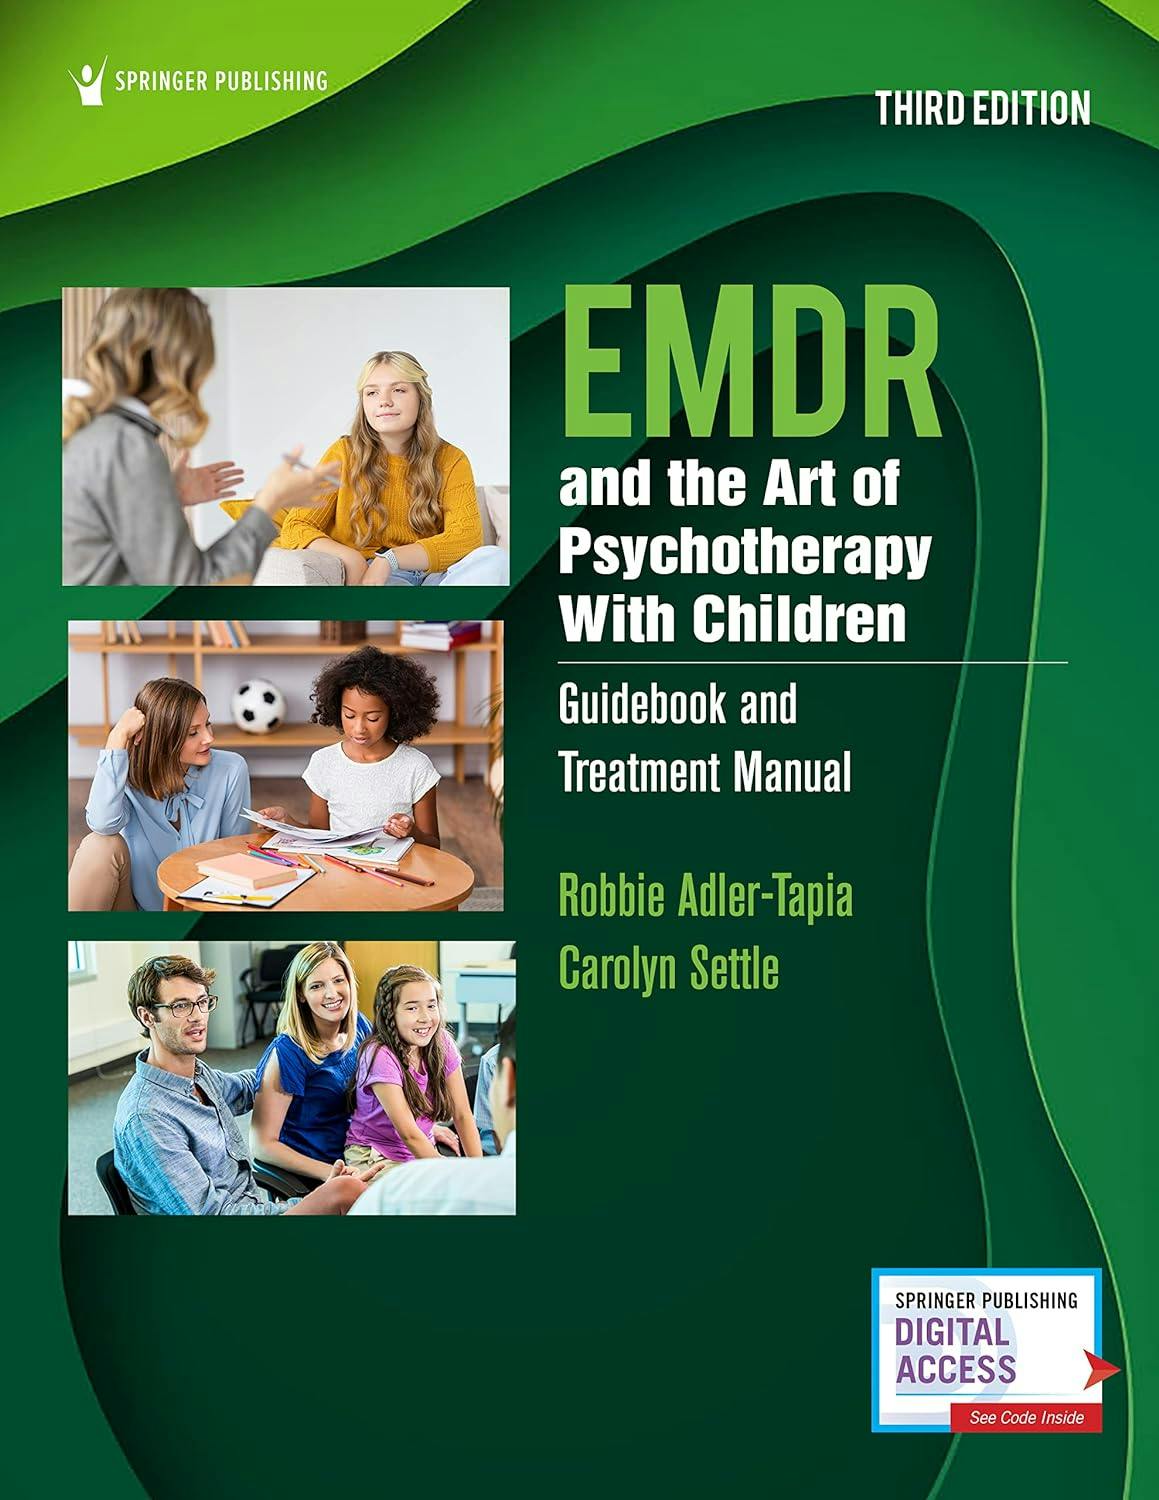 Book cover of "EMDR and the Art of Psychotherapy With Children, Third Edition"